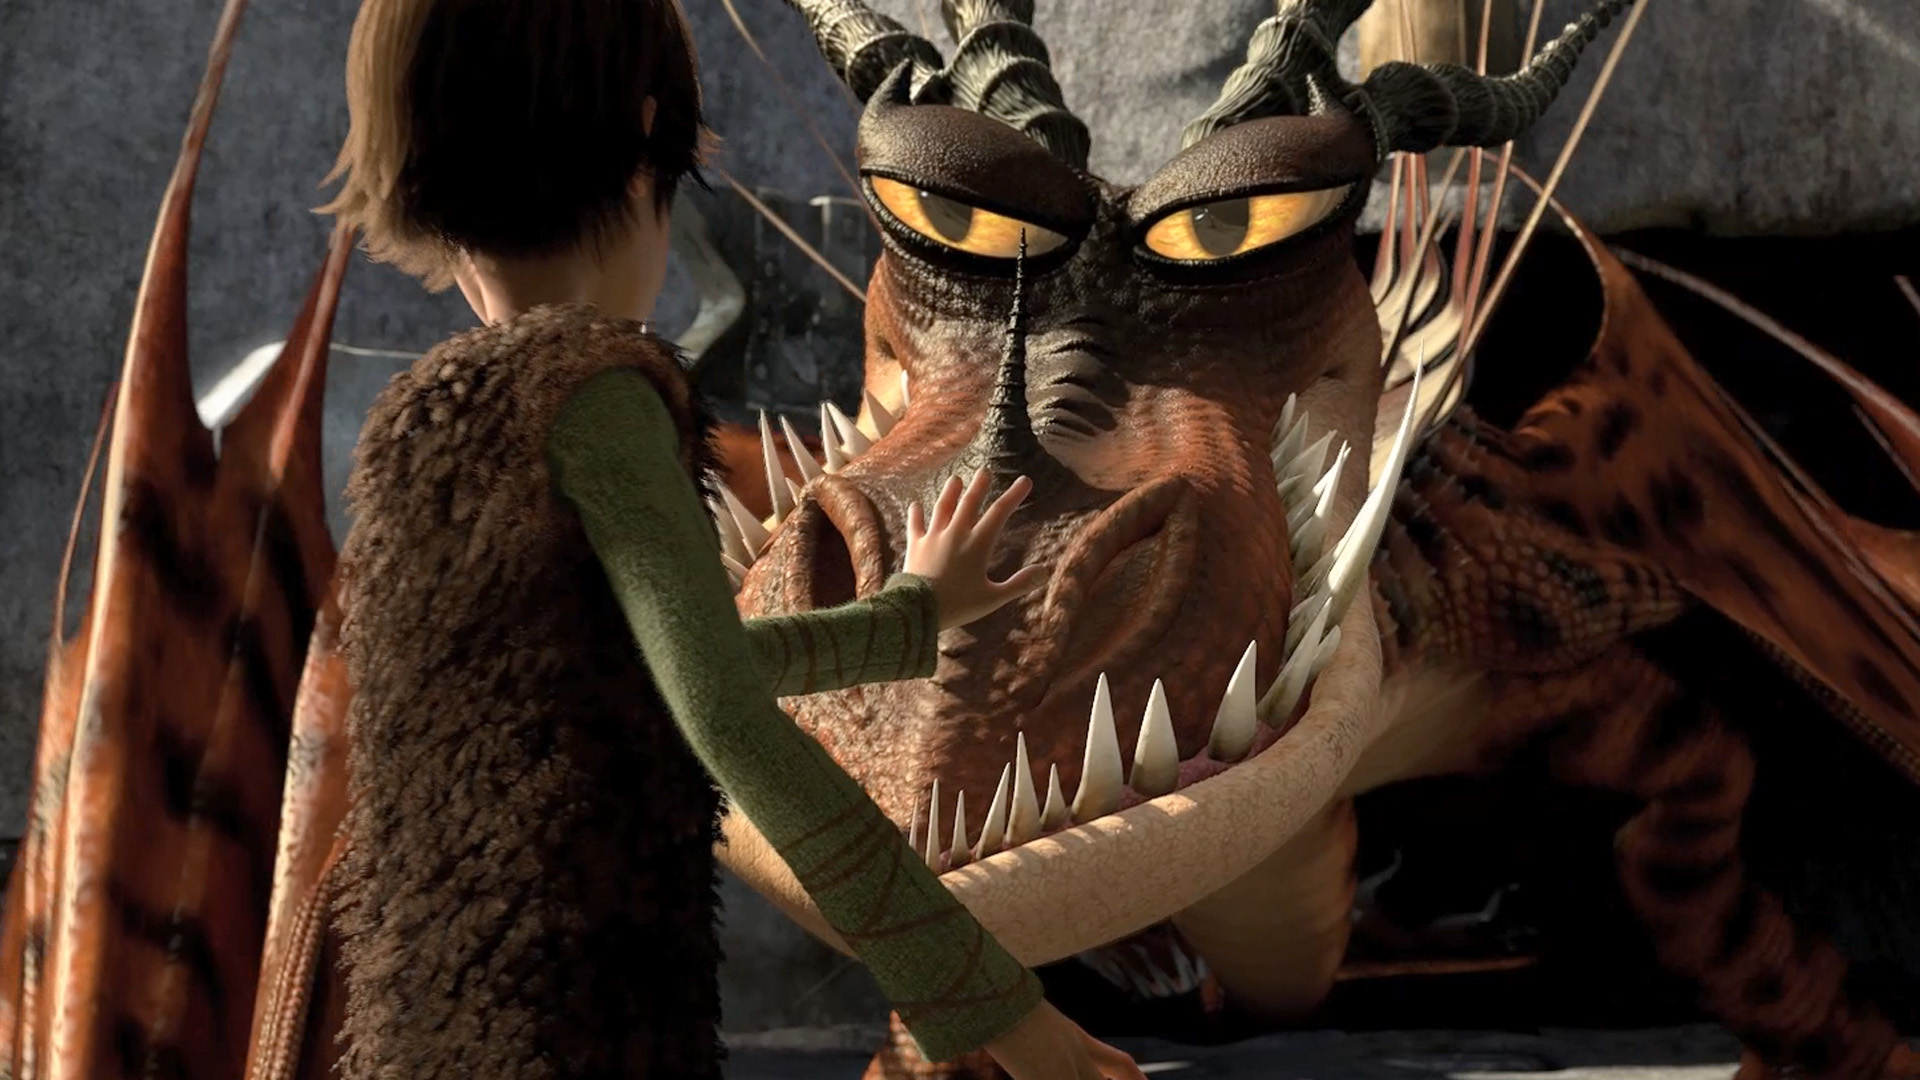 Hiccup attempts to tame a large, wary dragon in the training ring.